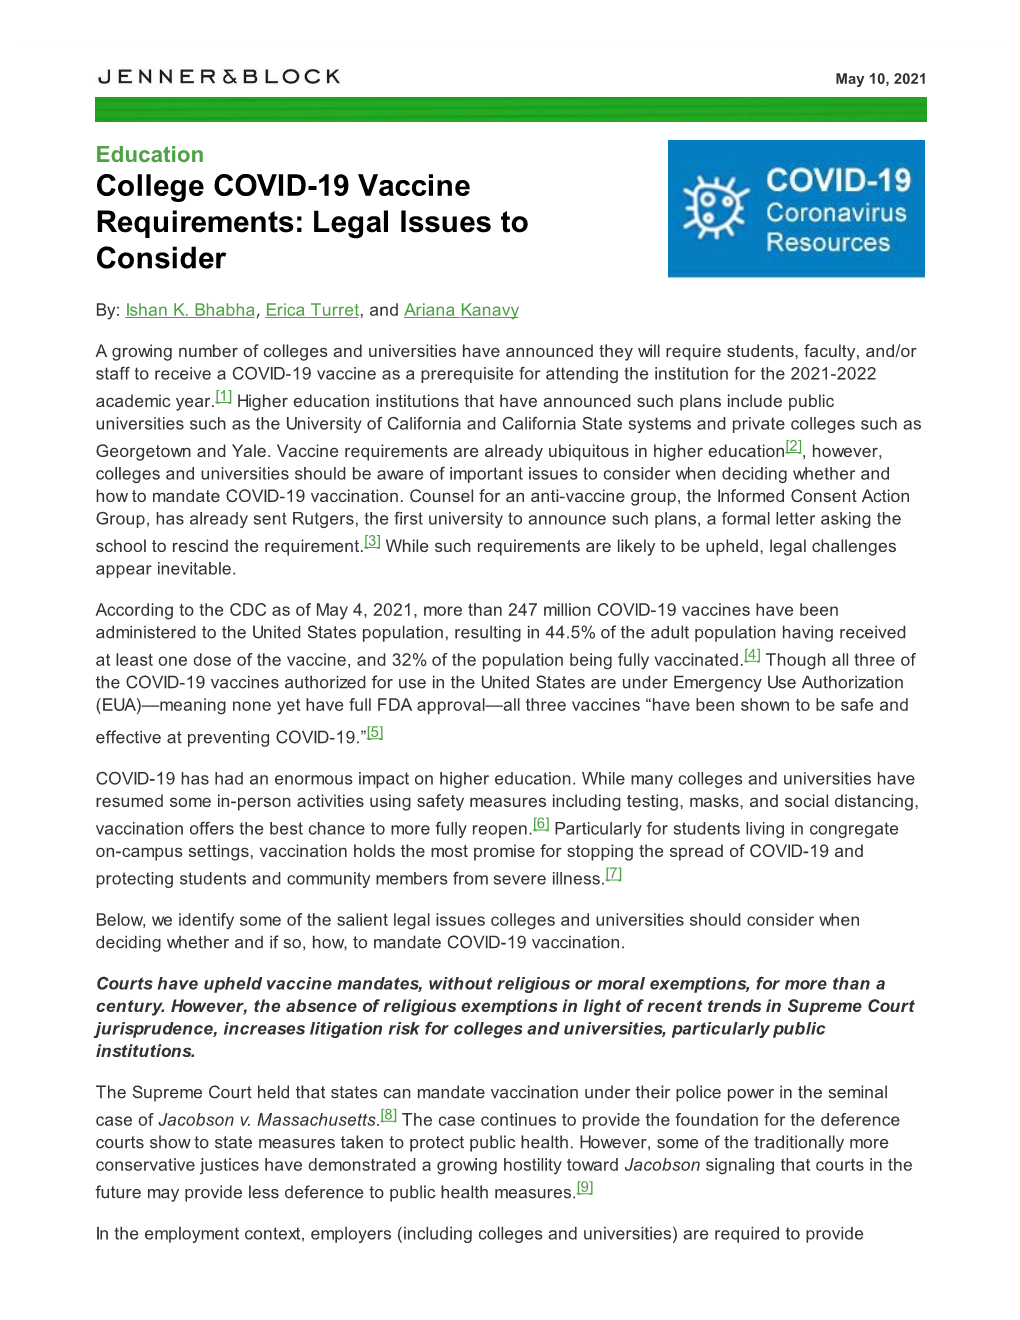 College COVID-19 Vaccine Requirements: Legal Issues to Consider